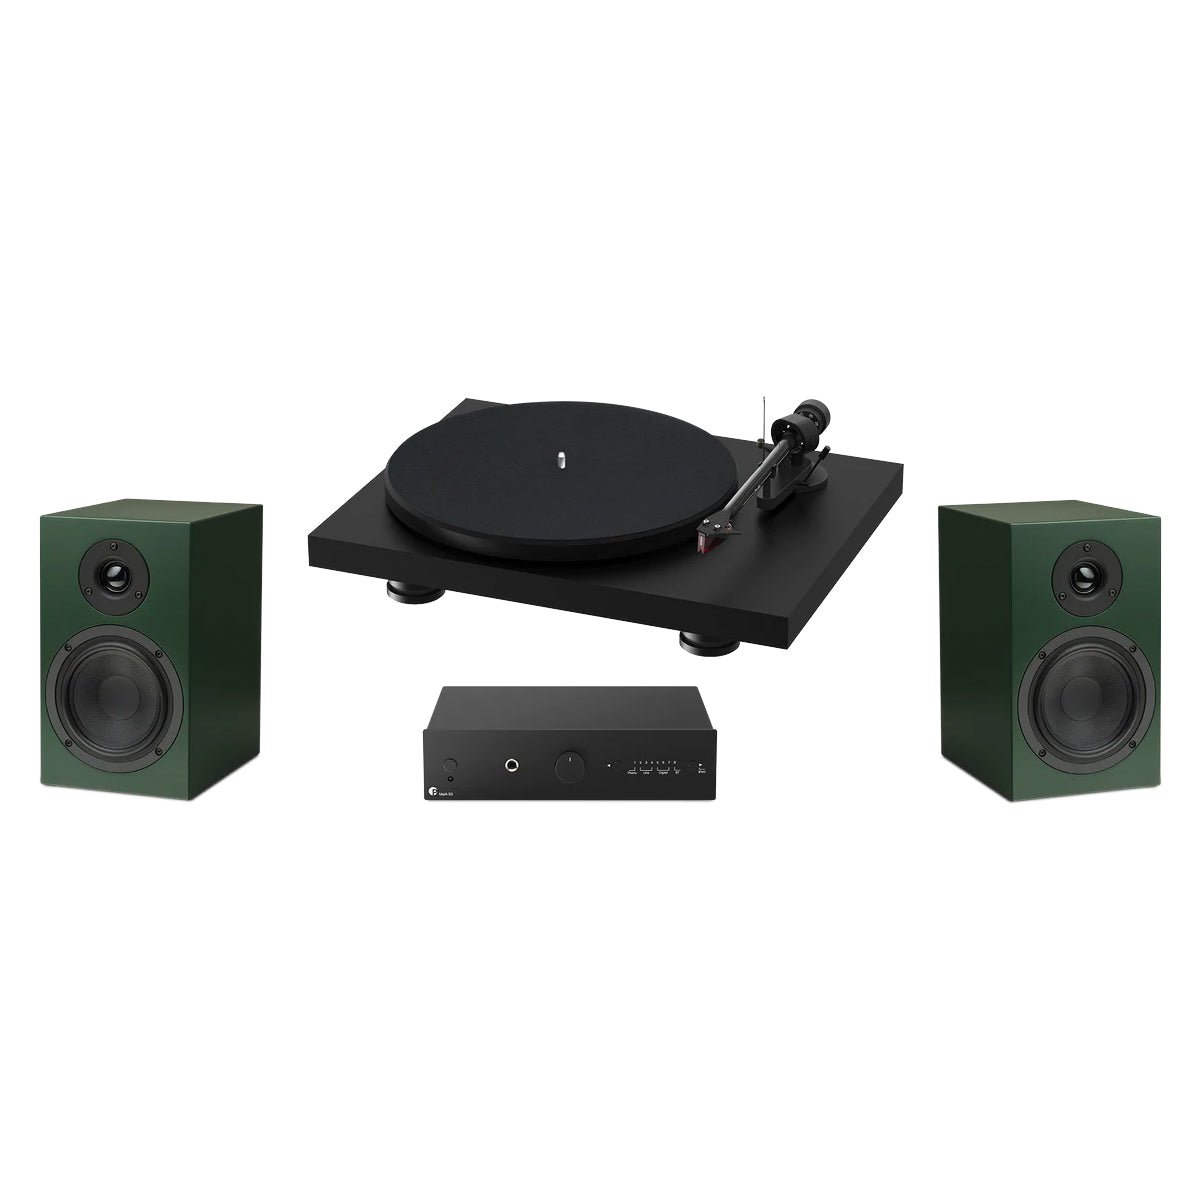 Pro-Ject Colorful Audio System - Black TT/Green Speakers - The Audio Experts